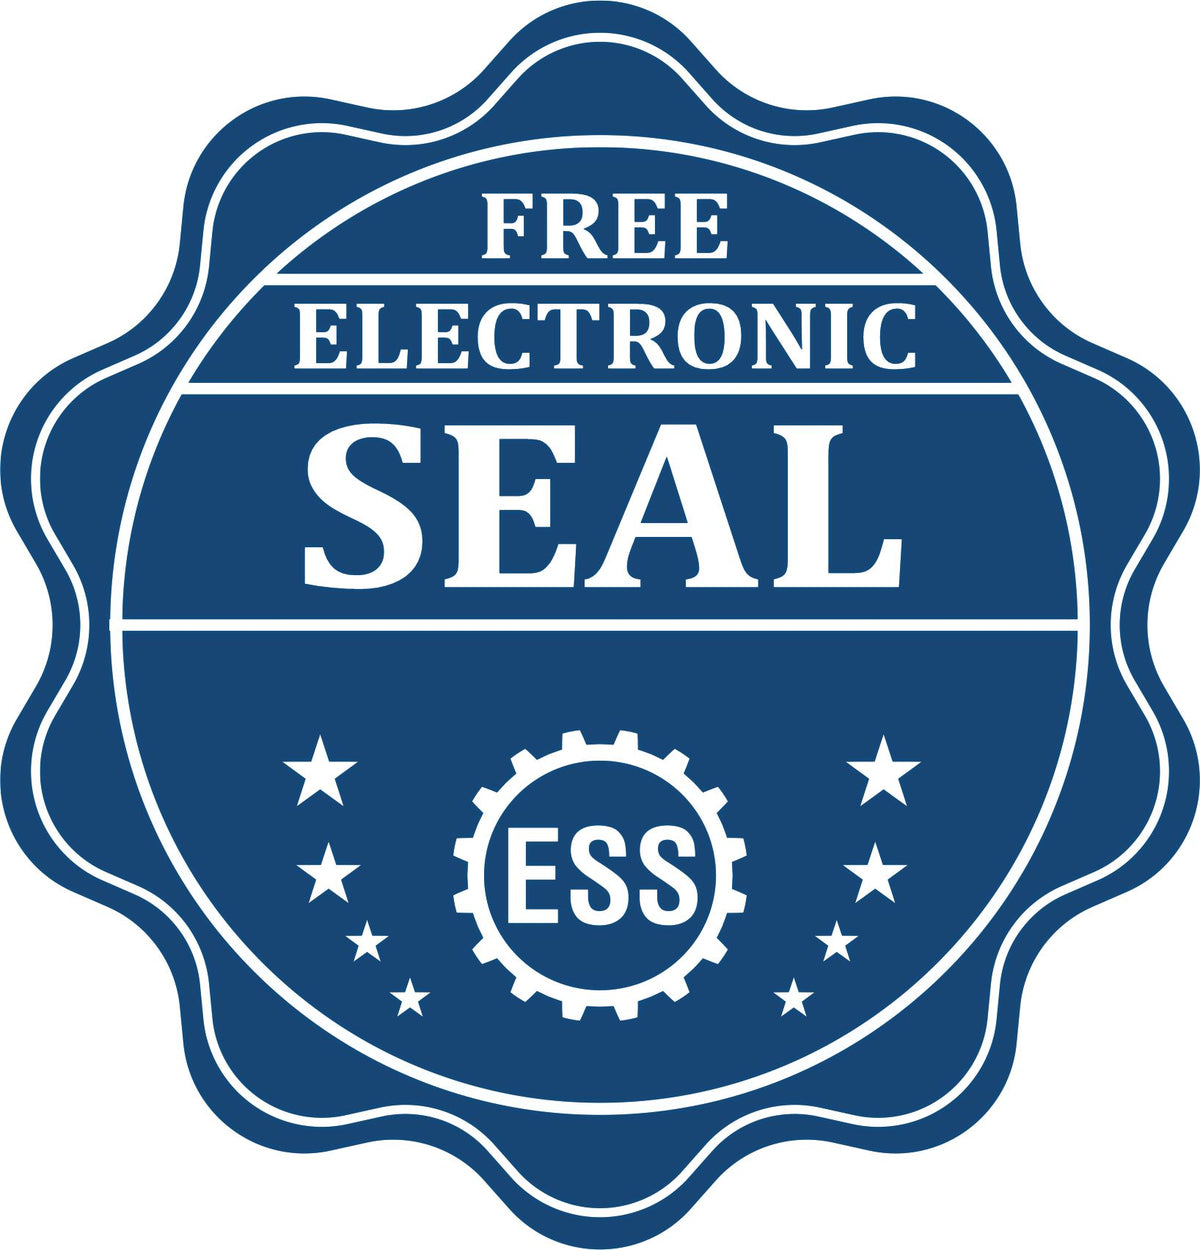 A badge showing a free electronic seal for the Extended Long Reach Montana Surveyor Embosser with stars and the ESS gear on the emblem.